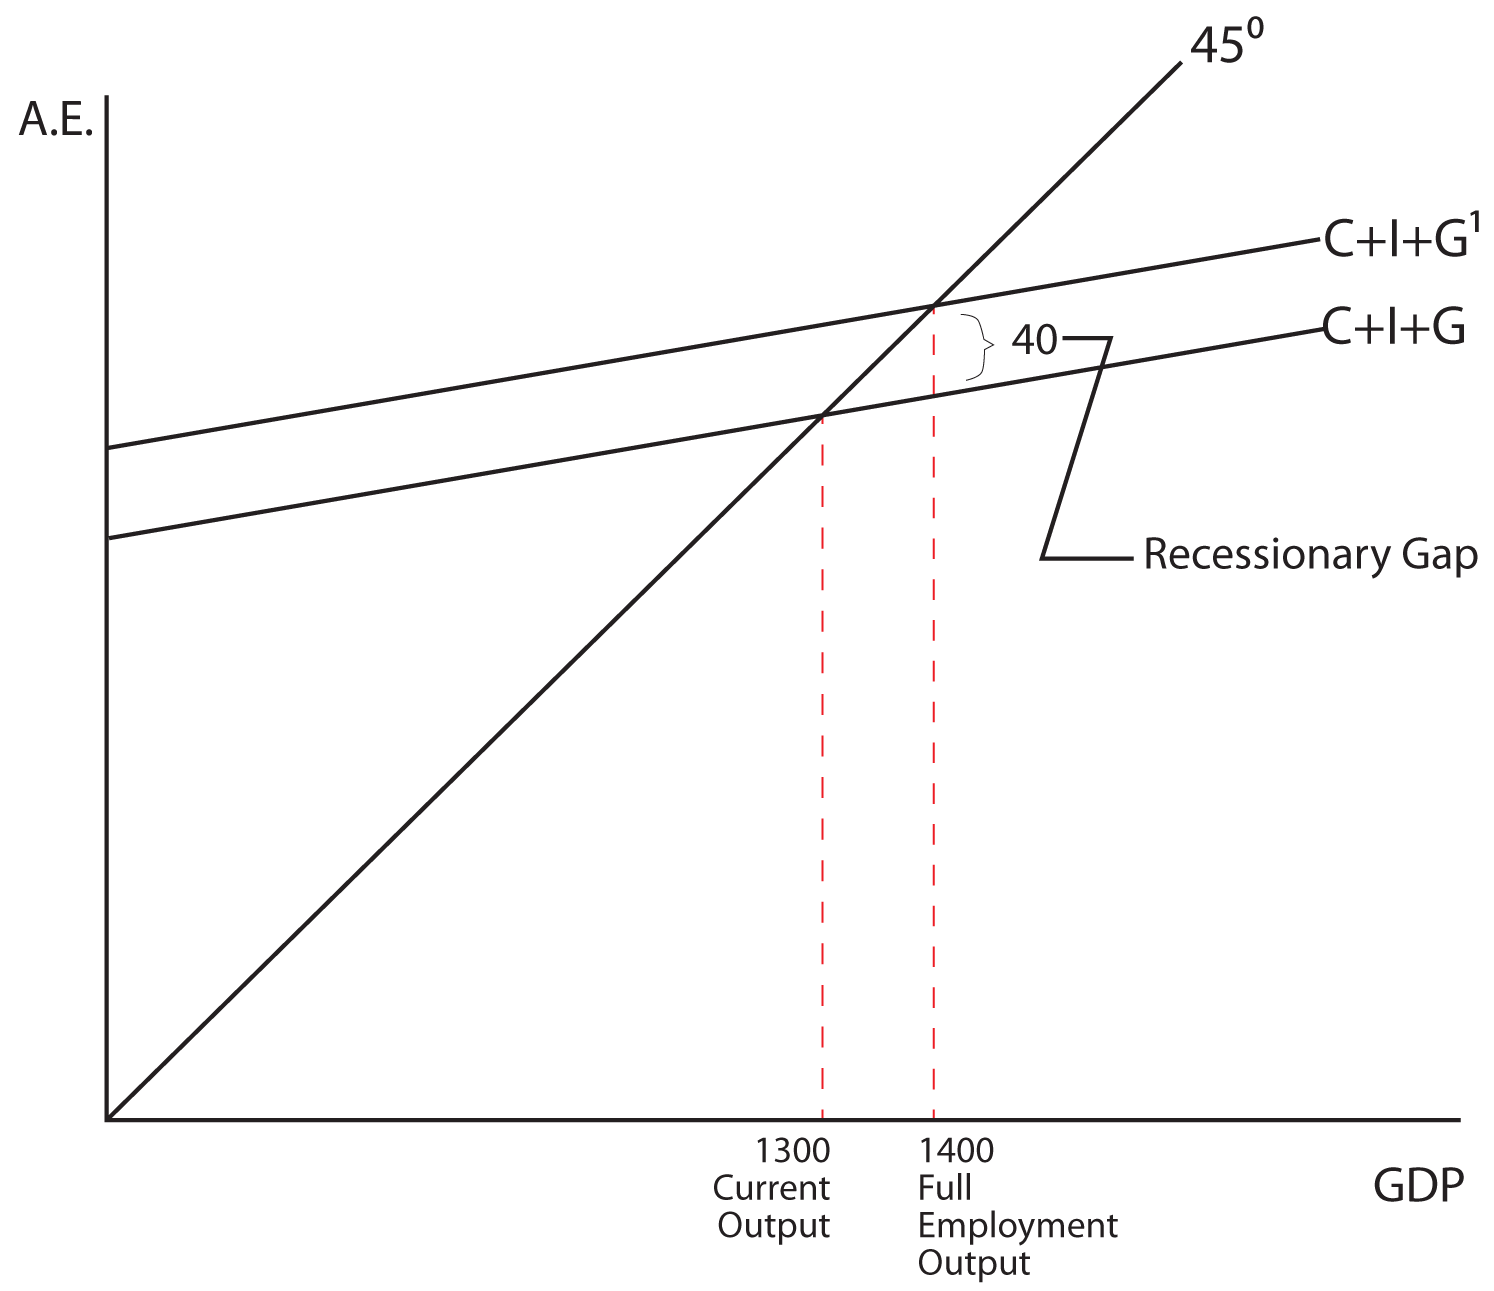 Image 7.12: The image shows a graph. The y axis is labeled A.E. The x axis is labeled GDP. There is a 45 degree line drawn from the origin. There are two lines drawn from the y axis, the first has a slope of C+I+G and it intersects the 45 degree line at 1300 units on the x axis, or the current output, the second has a slope of C+I+G superscript 1 and it intersects the 45 degree line at 1400 units on the x axis, or full employment output. The area between C+I+G and C+I+G superscript 1 is 40 or recessionary gap.